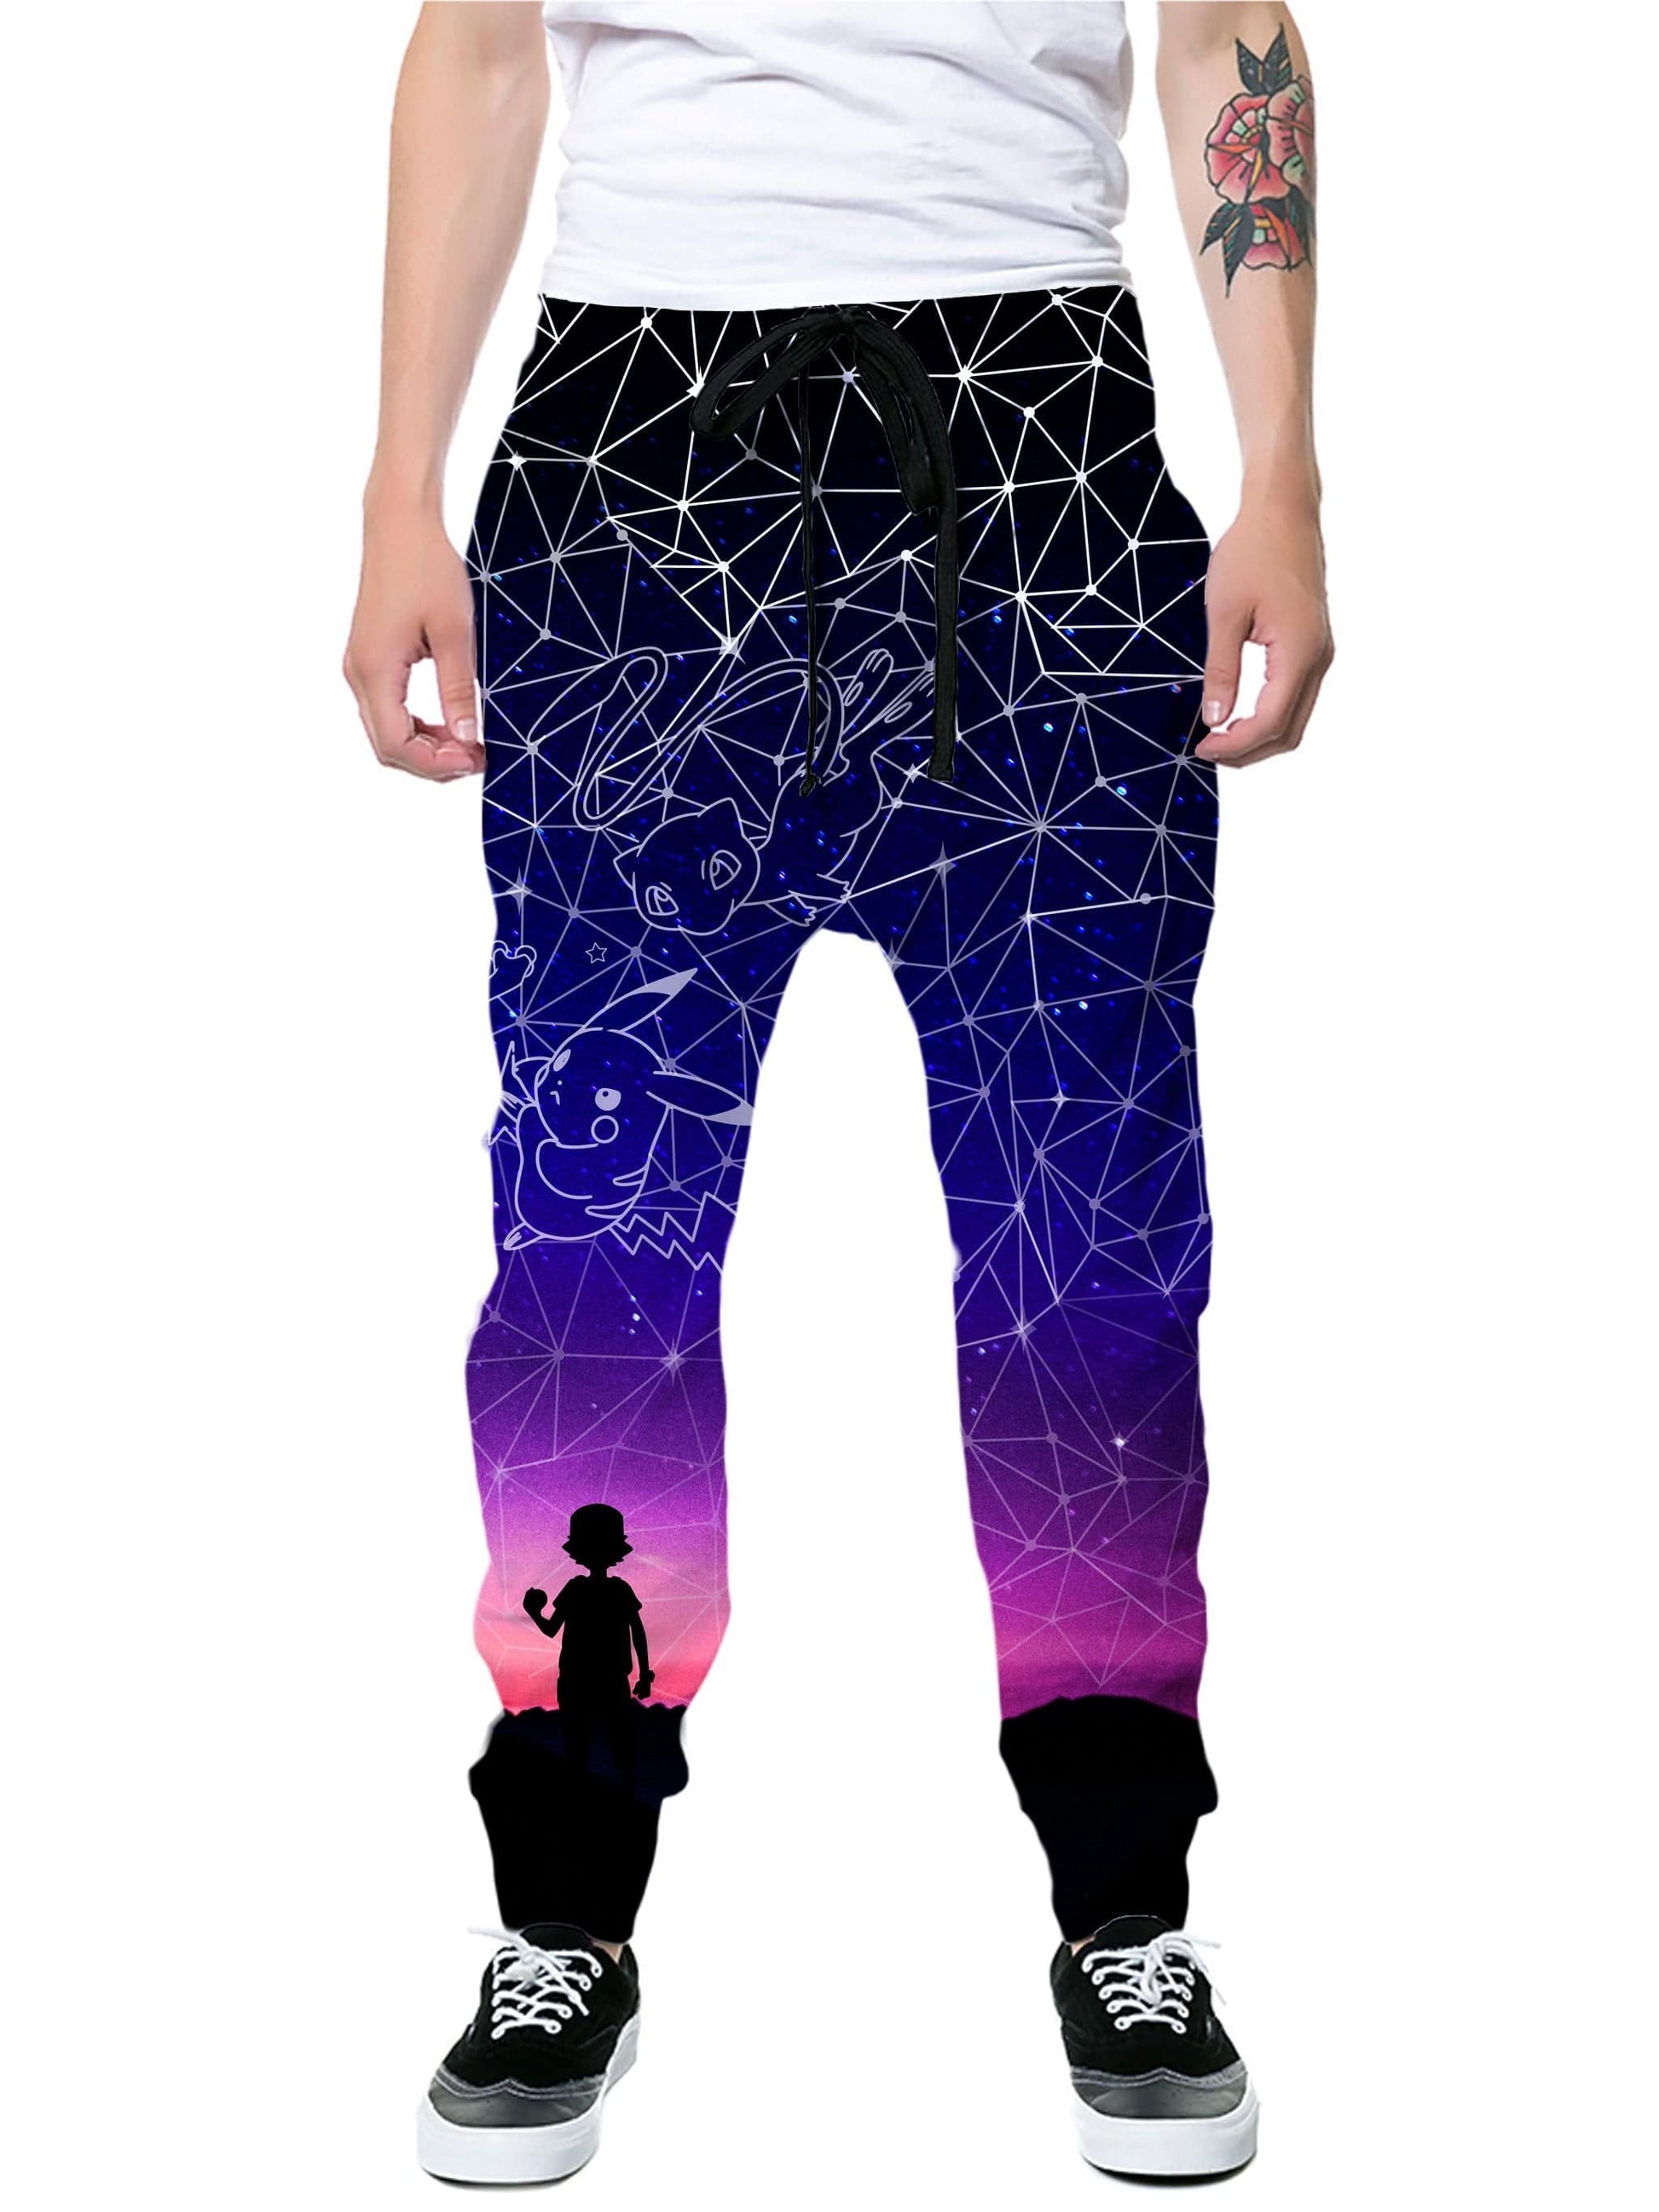 The Very Best Joggers, Noctum X Truth, | iEDM